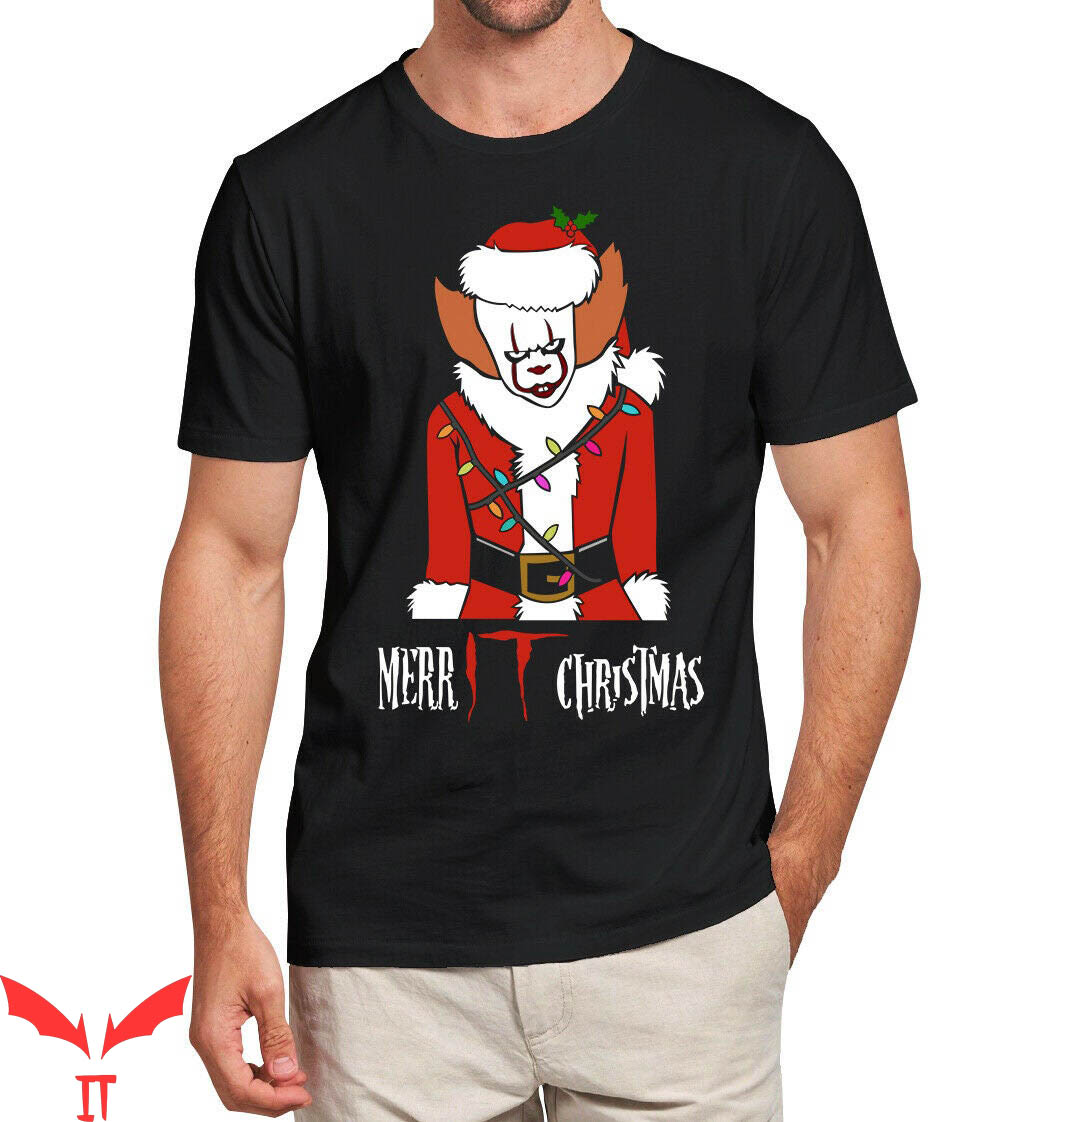 Pennywise Christmas T Shirt New Ugly Christmas Pennywise